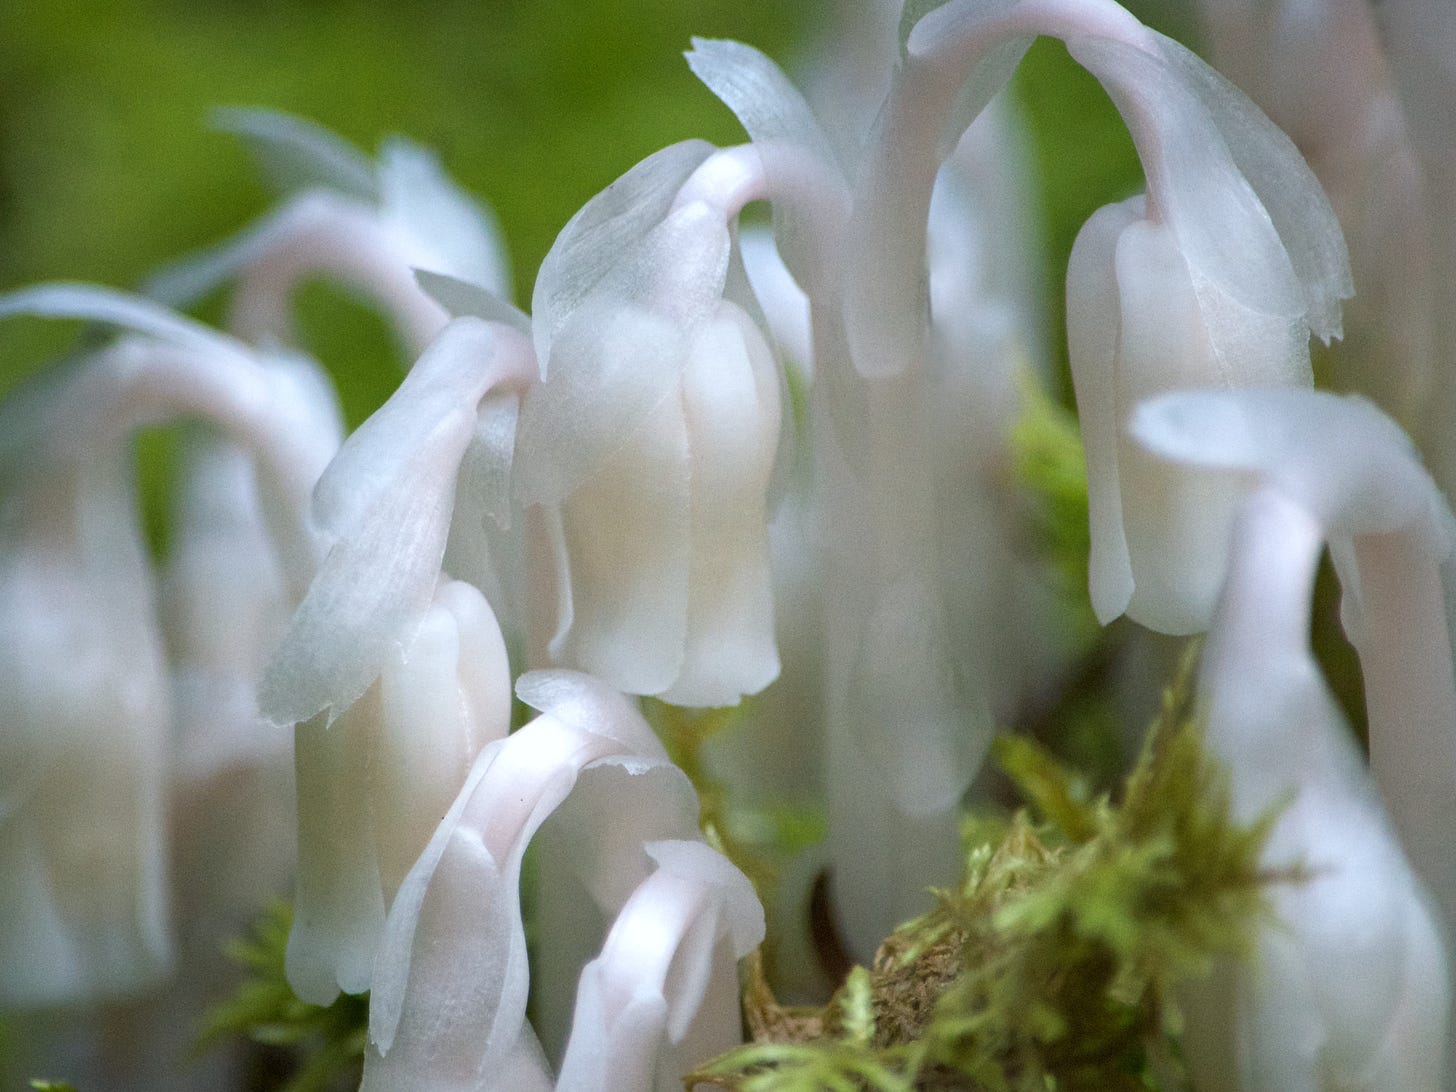 A close-up of shimmery white Ghost Plant blossoms hovering above the moss.